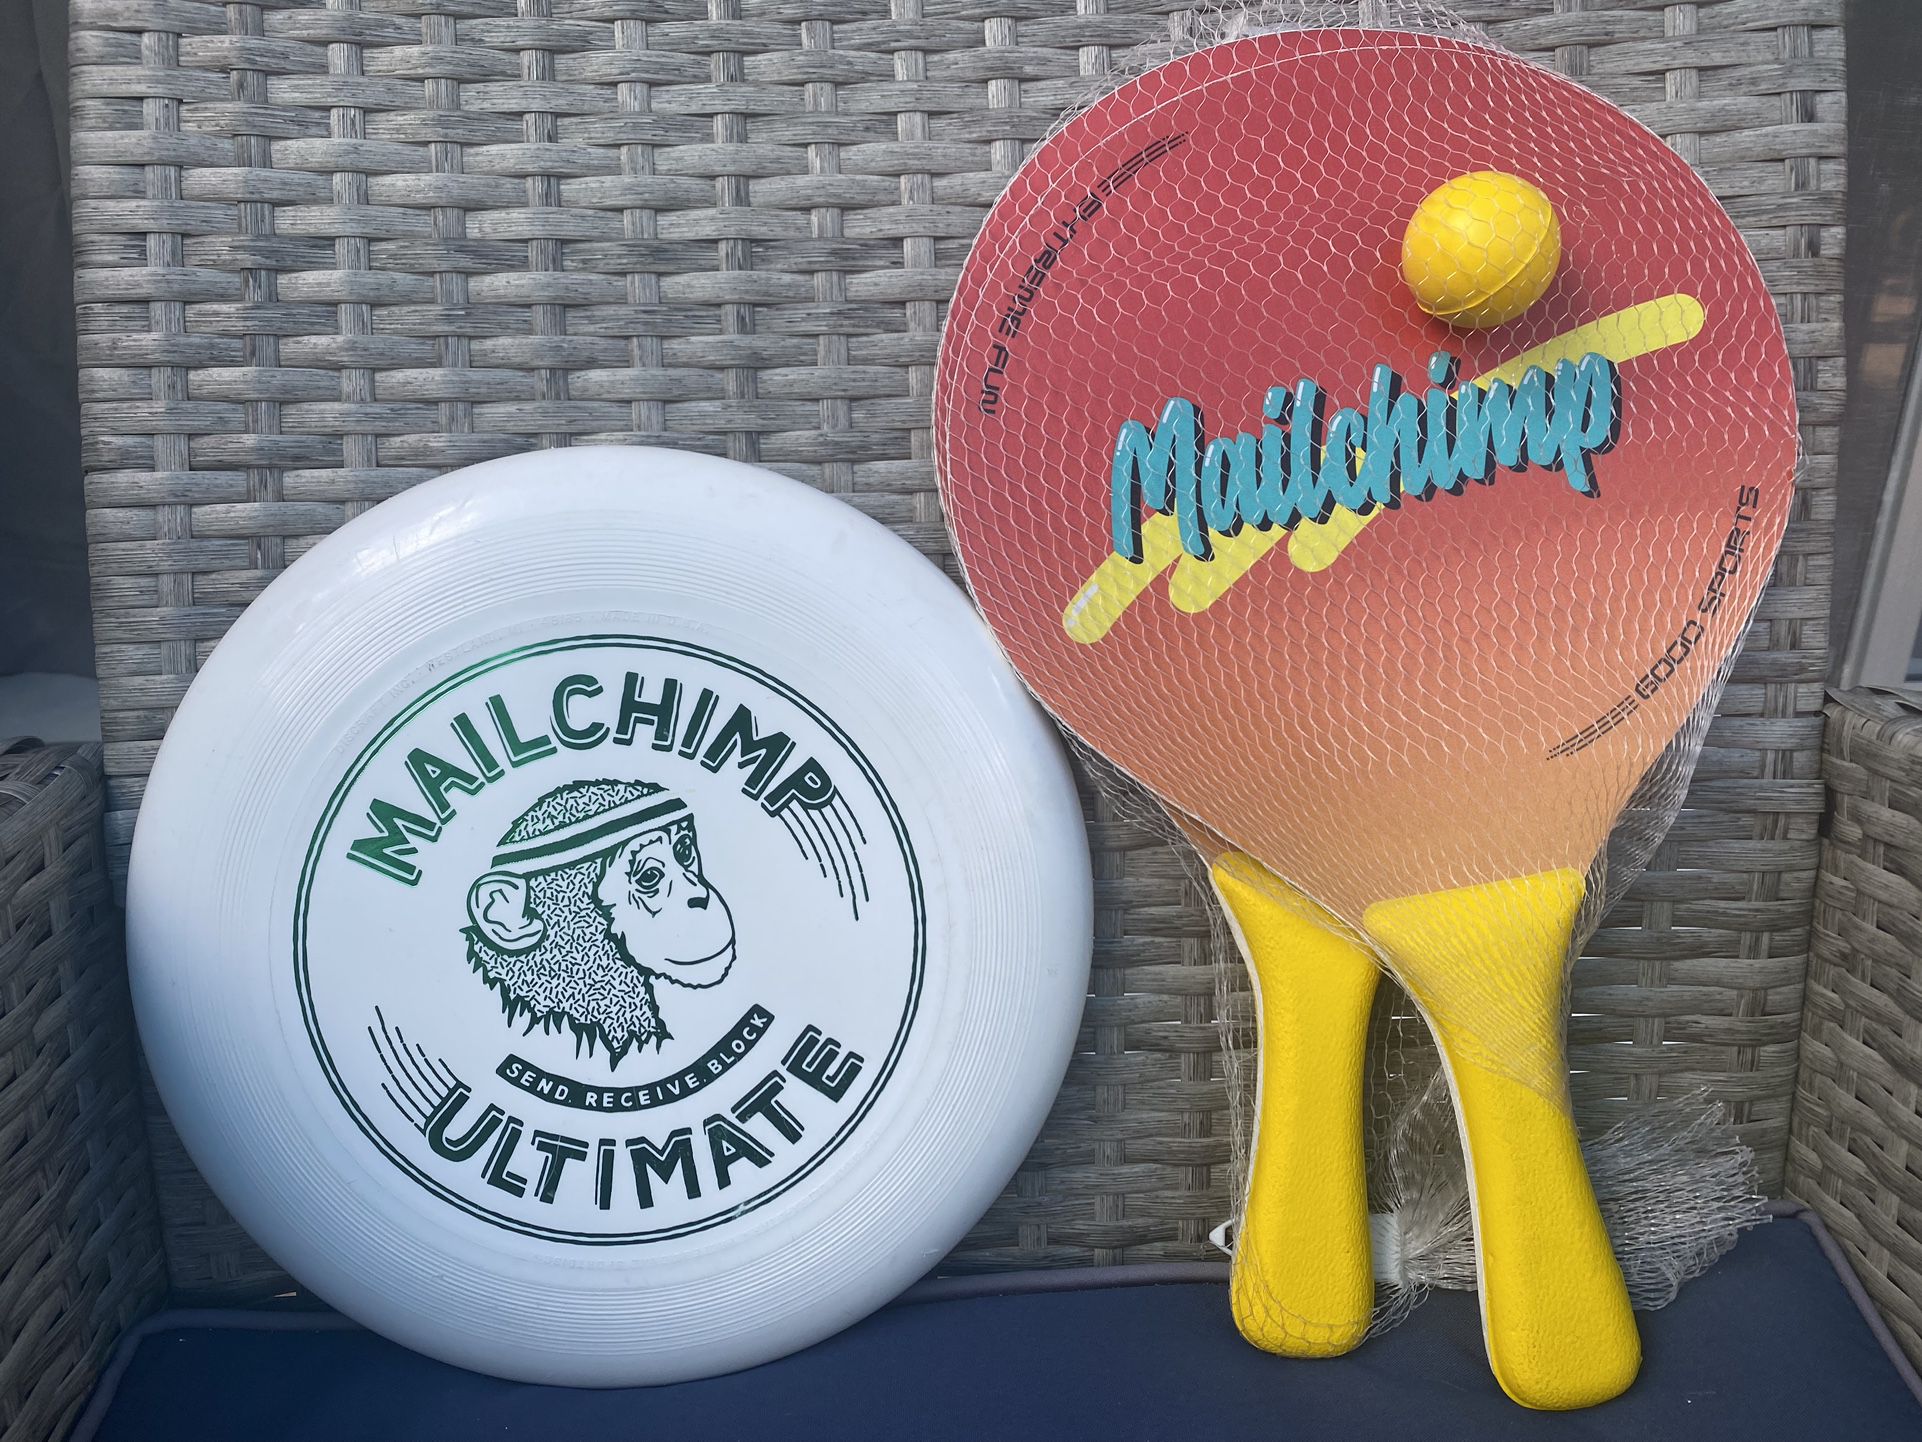 Mailchimp Frisbee And Paddle Ball Set